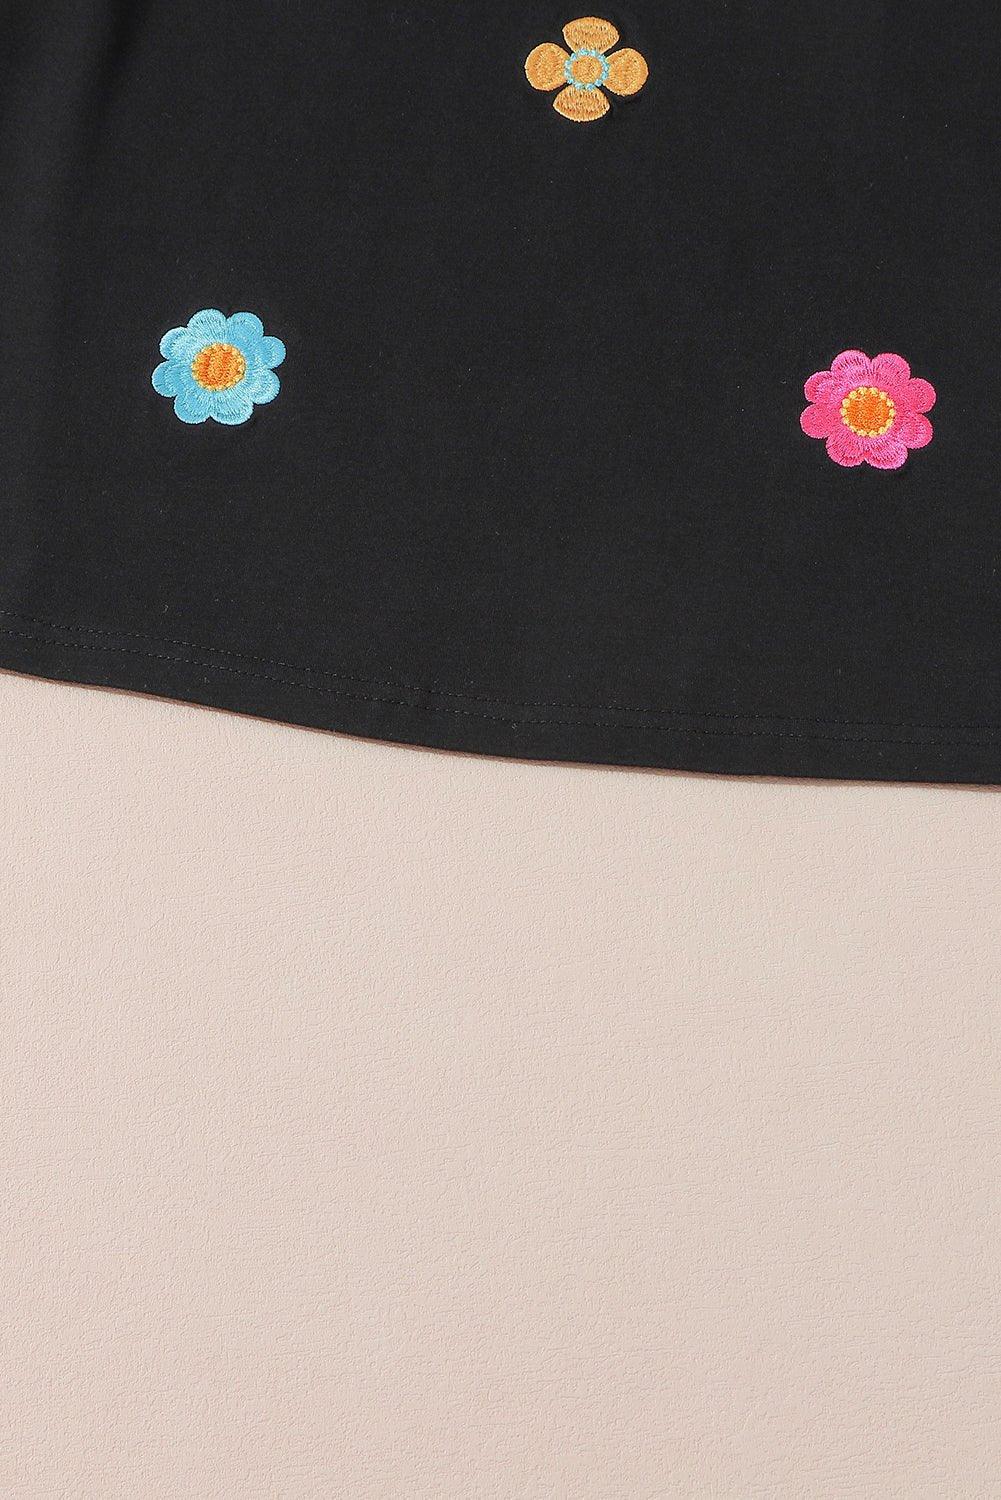 Flowery Embroidered Puff Sleeve Black Sweater